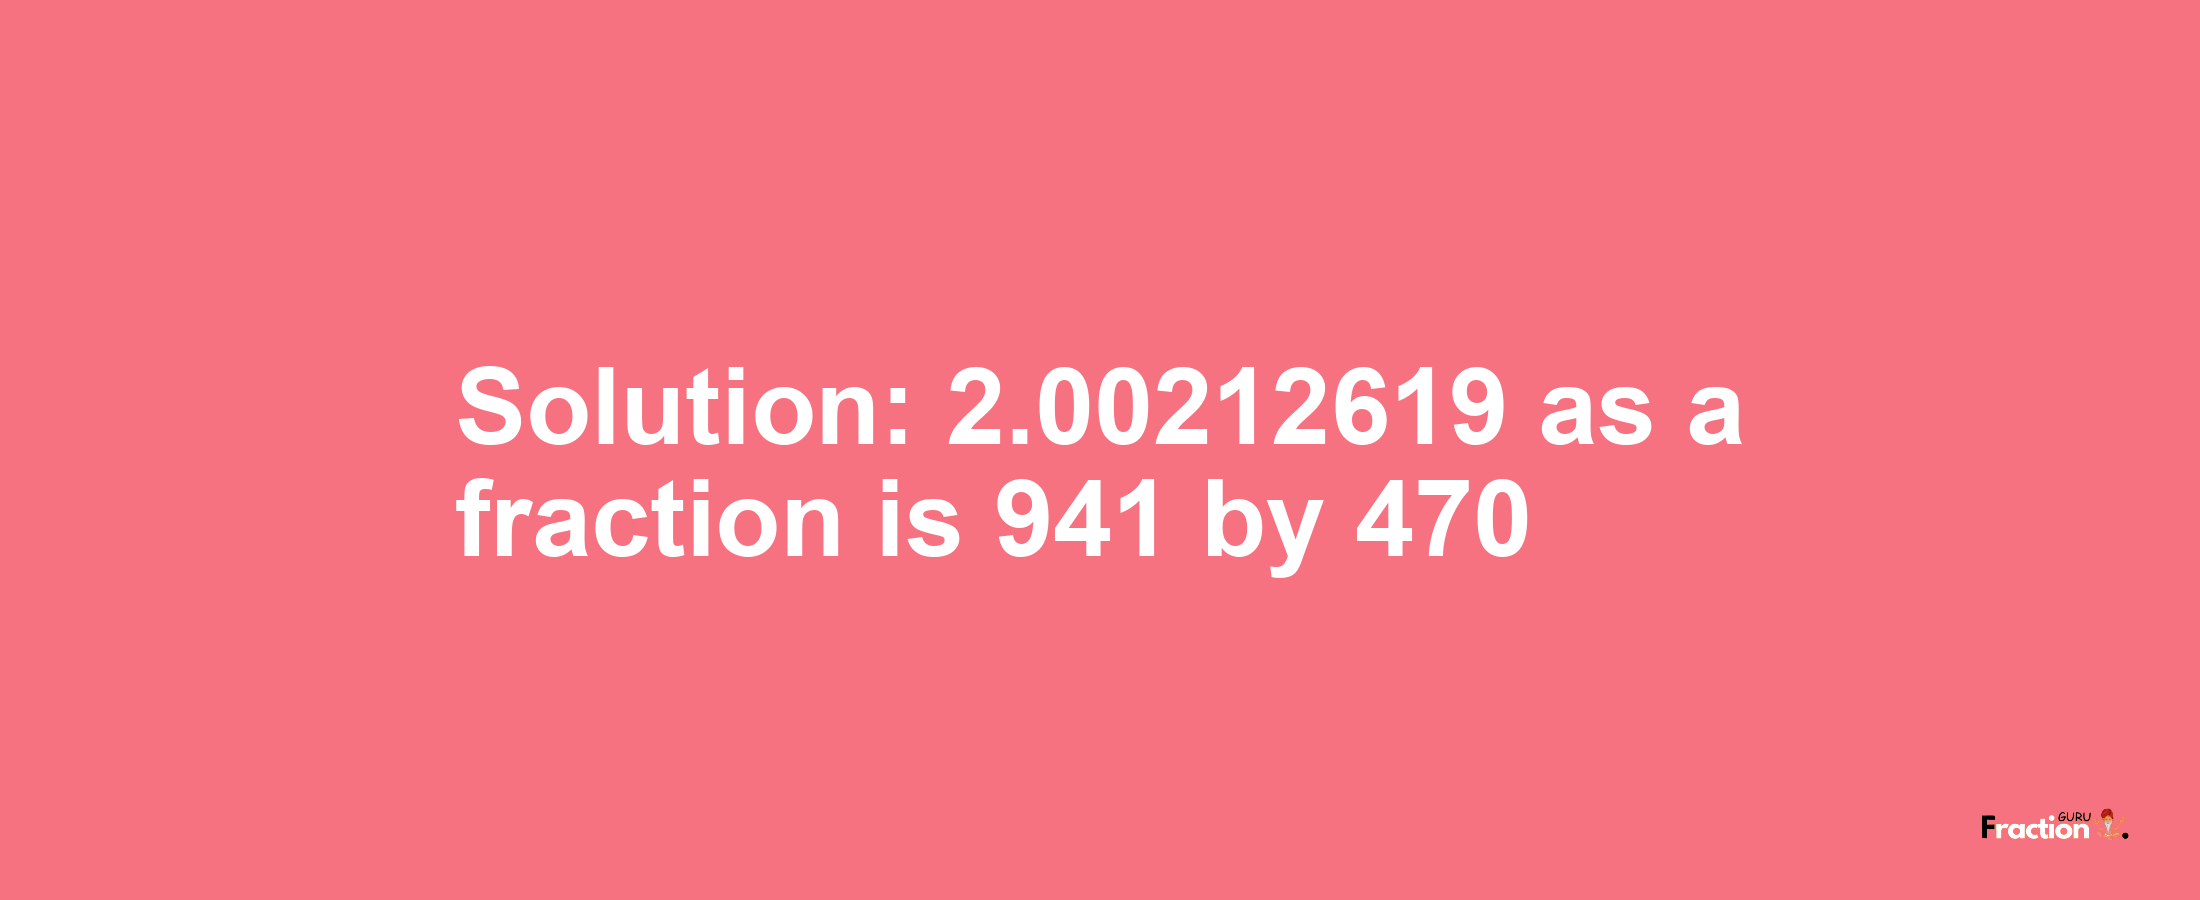 Solution:2.00212619 as a fraction is 941/470